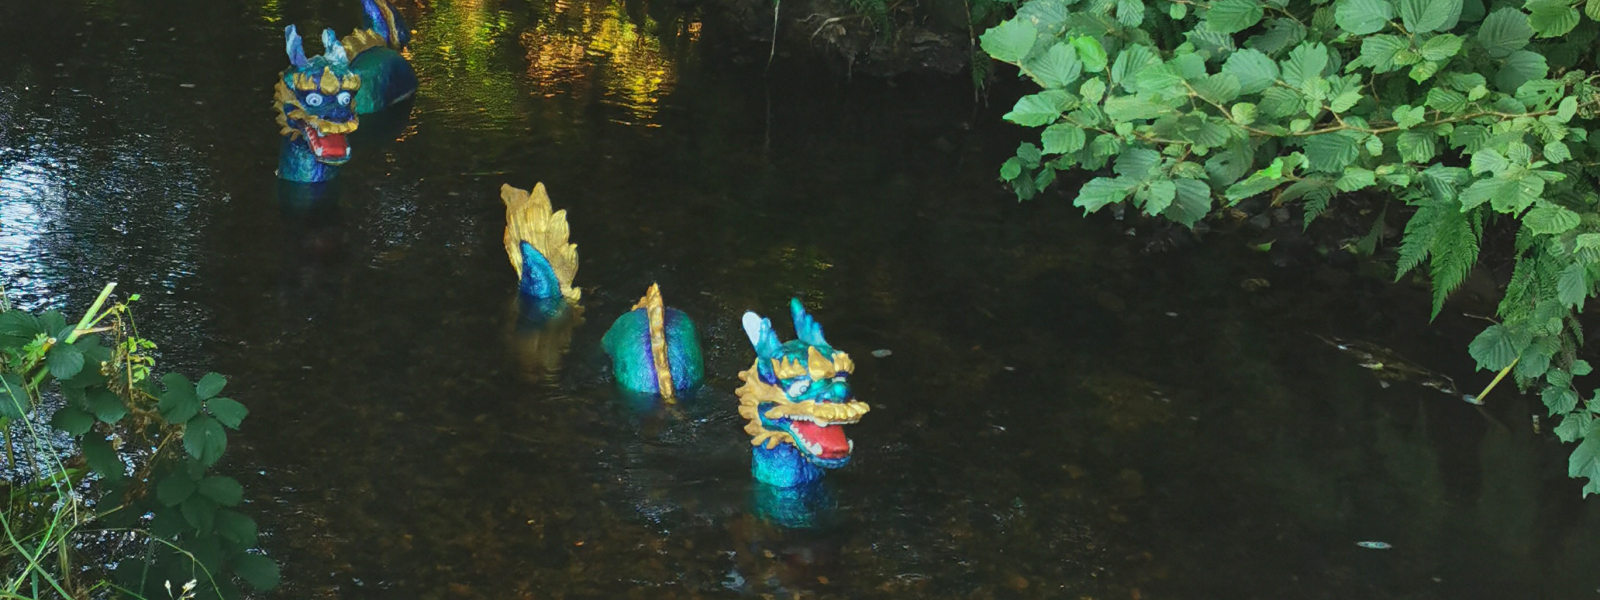 Painted nagas or dragons in a river